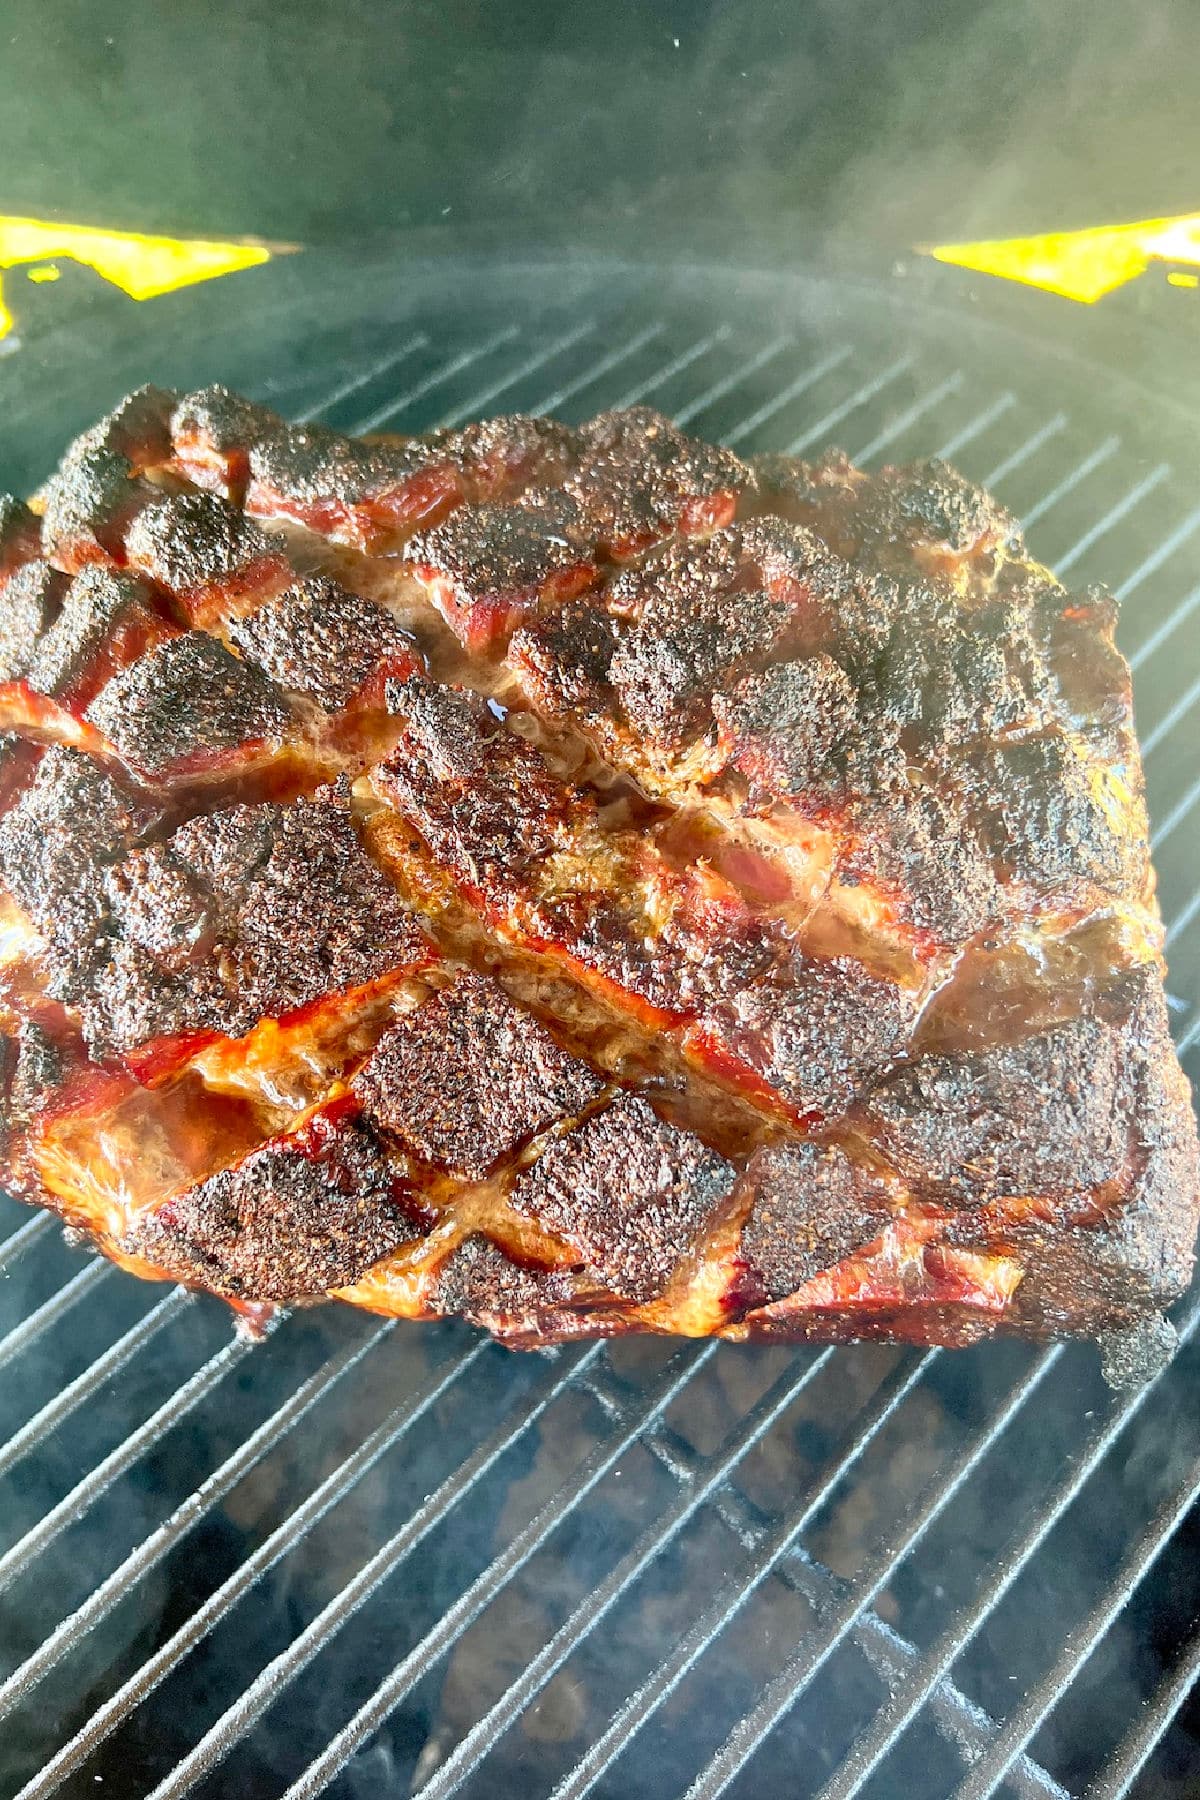 Grilling pork butt on a grill.